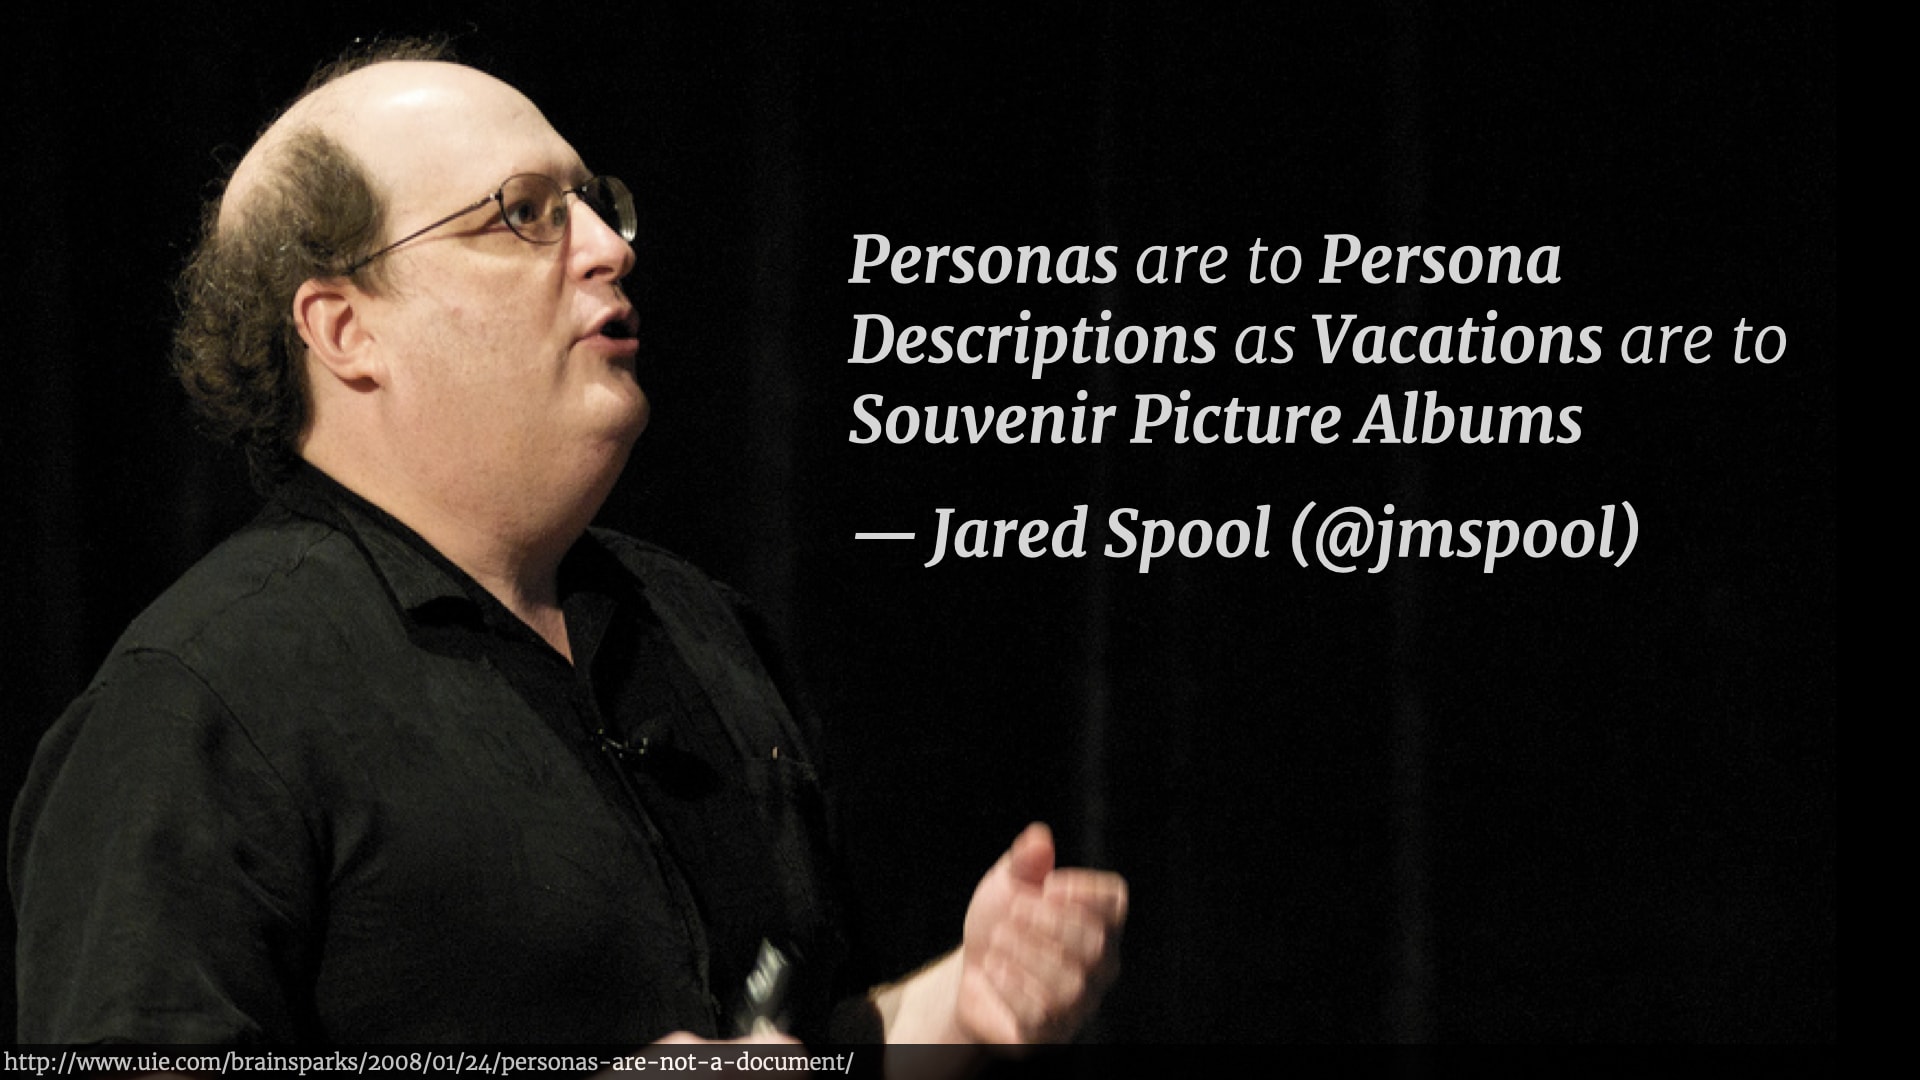 The quote “Personas are to Persona Descriptions as Vacations are to Souvenir Picture Albums” next to a photo of Jared Spool.